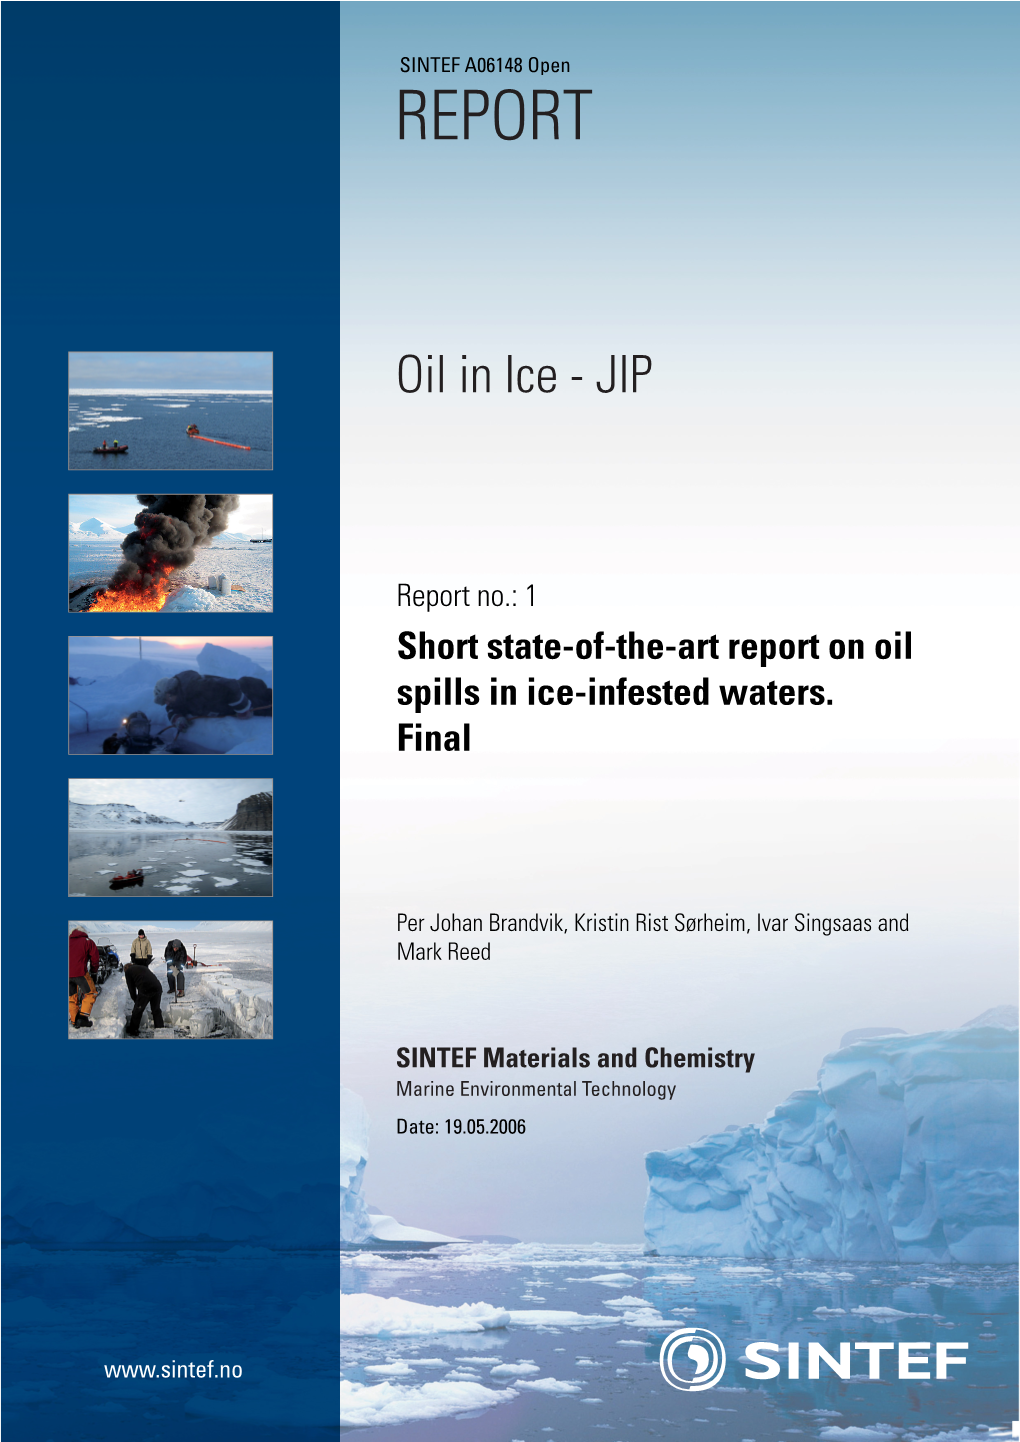 Short State-Of-The-Art Report on Oil Spills in Ice-Infested Waters. Final